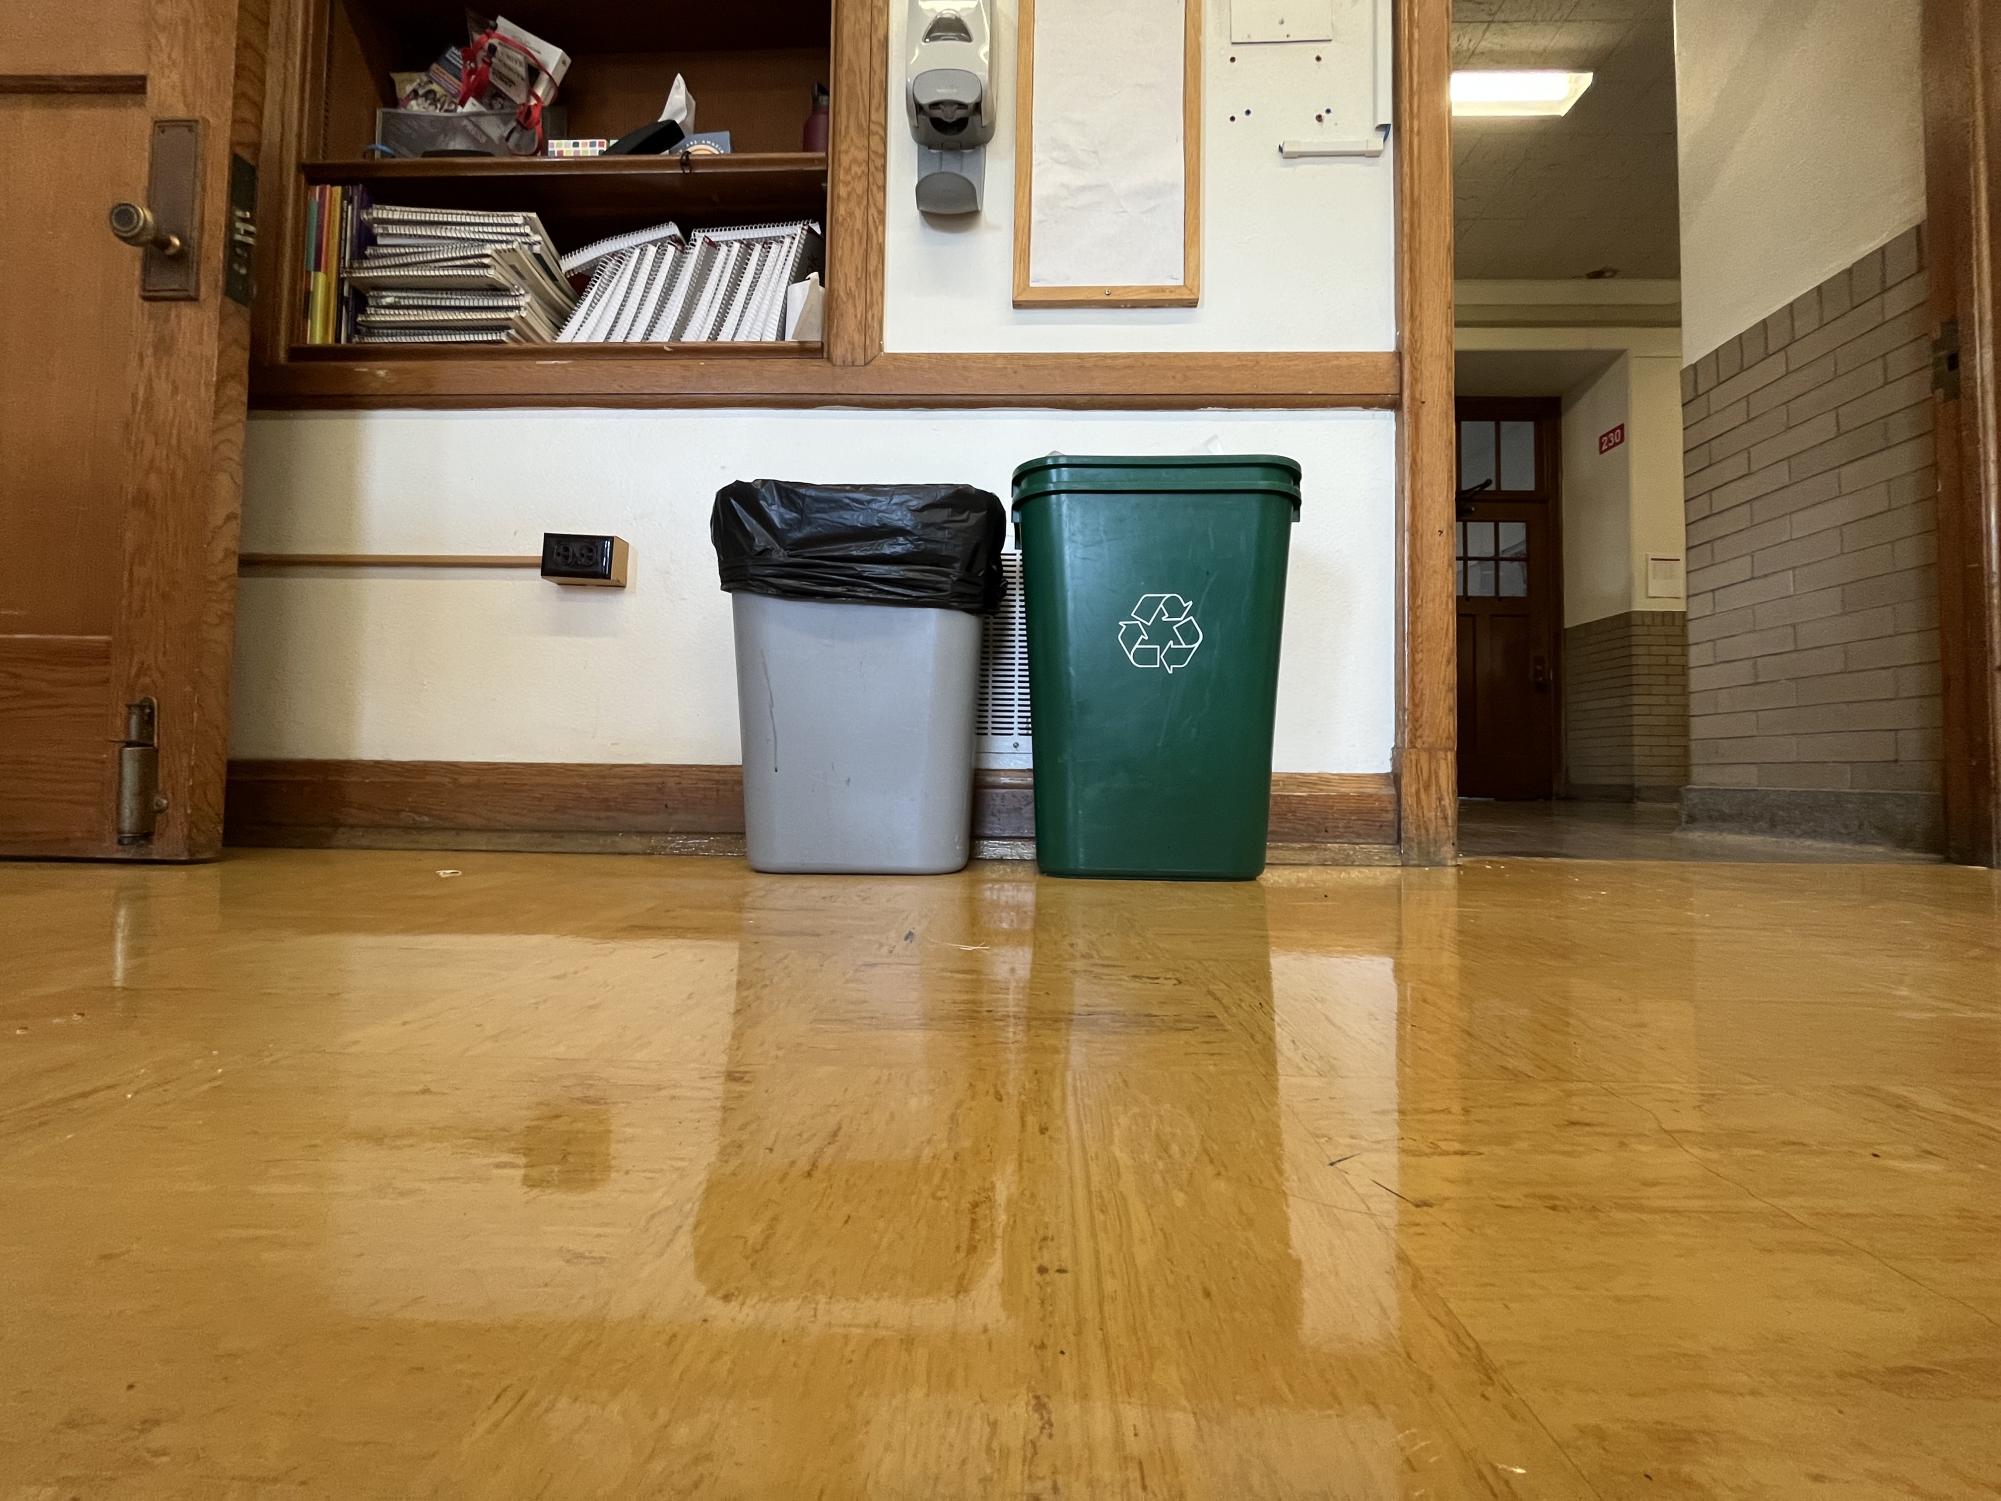 If paper is to be recycled from classrooms, students must take care not to put garbage in green or blue recycling receptacles. Once trash is introduced to a recycling can, all contents are considered refuse and are disposed of rather than recycled.